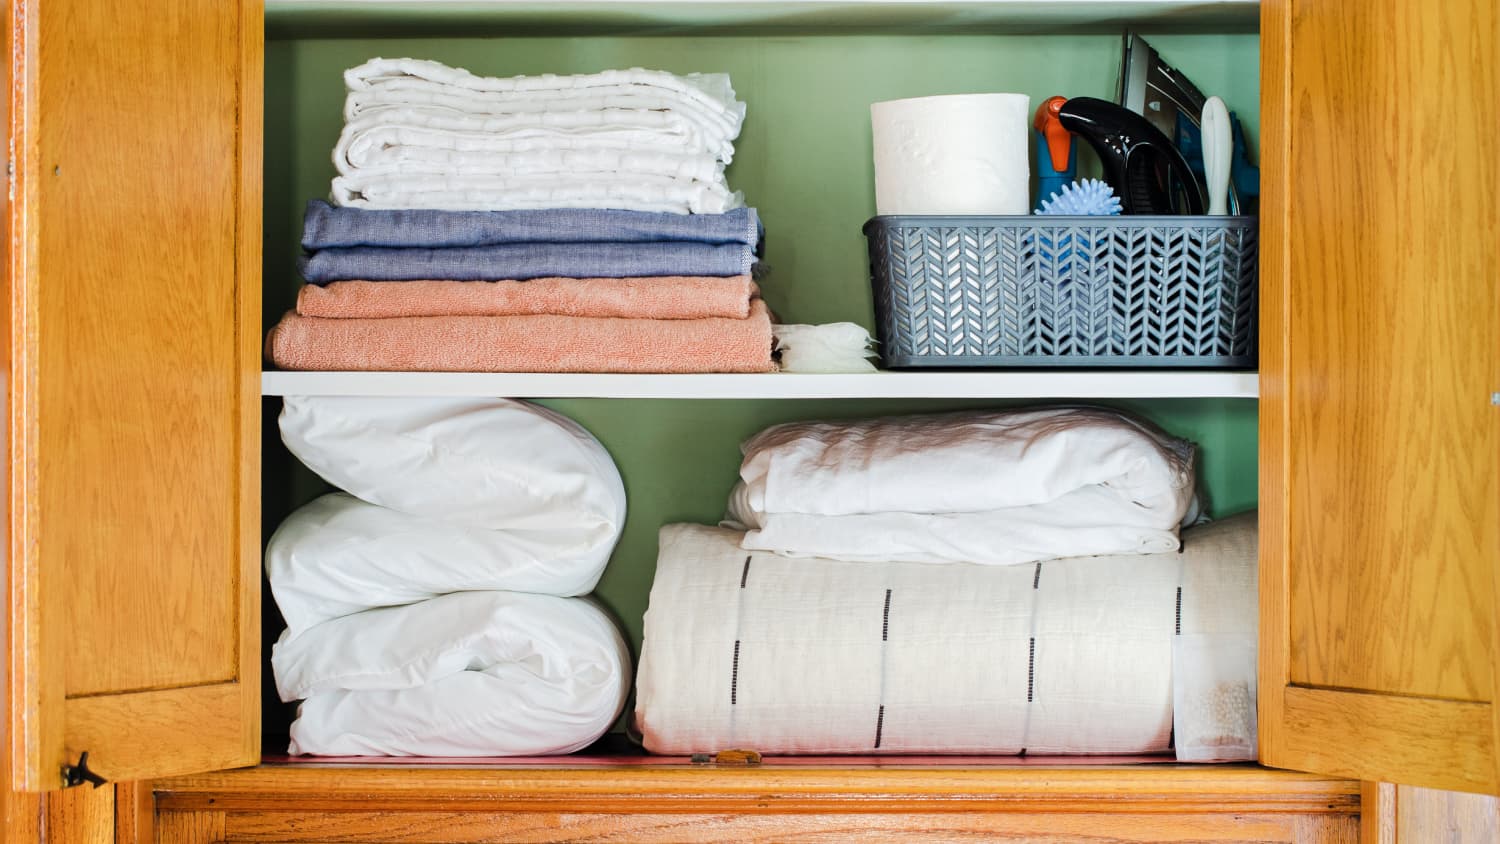 19 Unexpected, versatile and very practical pull-out shelf storage ideas